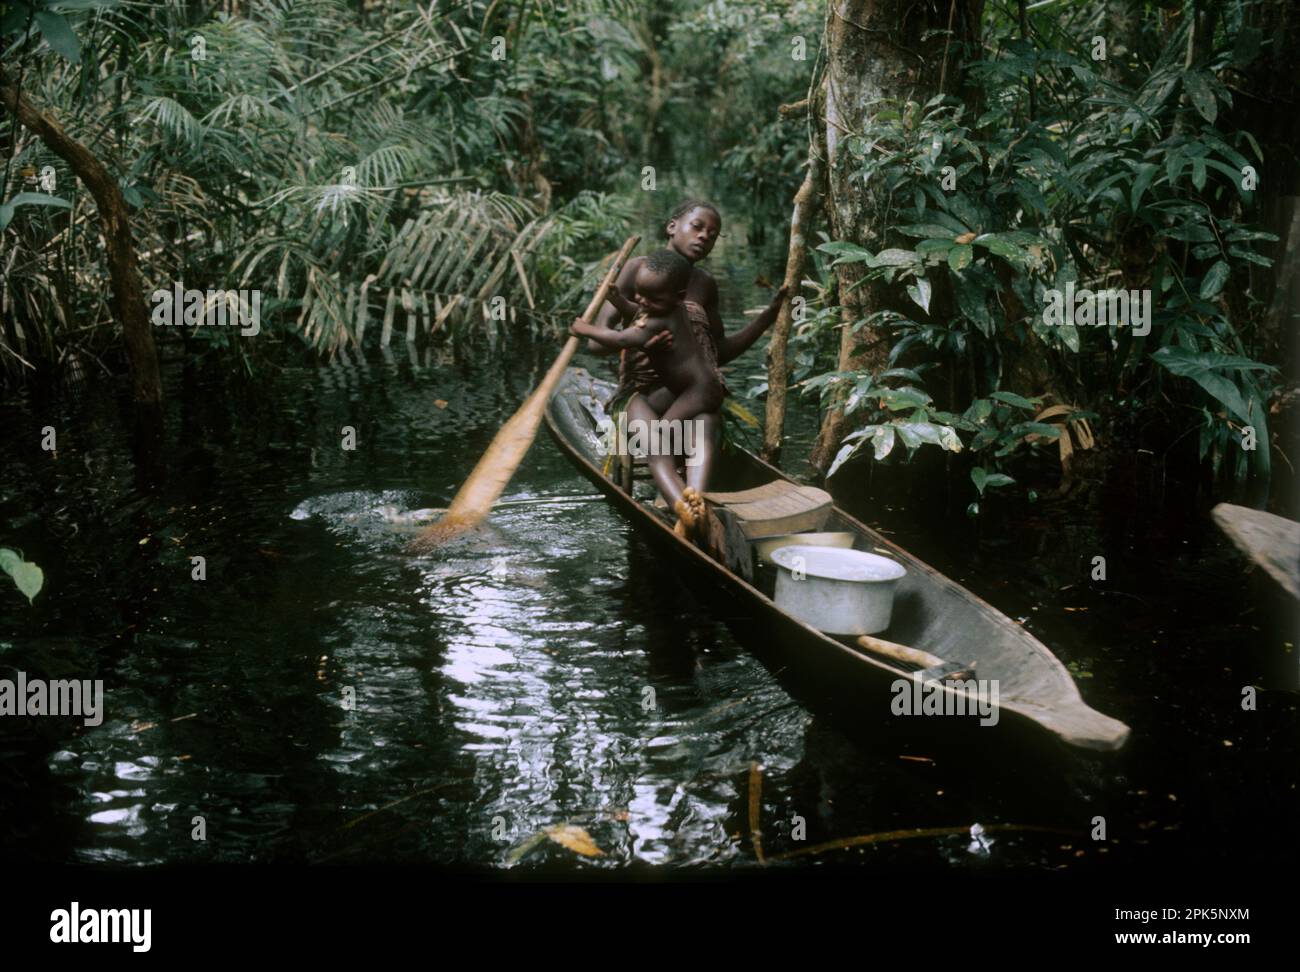 Africa, Democratic Republic of the Congo, Ngiri River islands area, Libinza ethnic group: girl with baby learning to paddle in canoe in swamp forest. Stock Photo